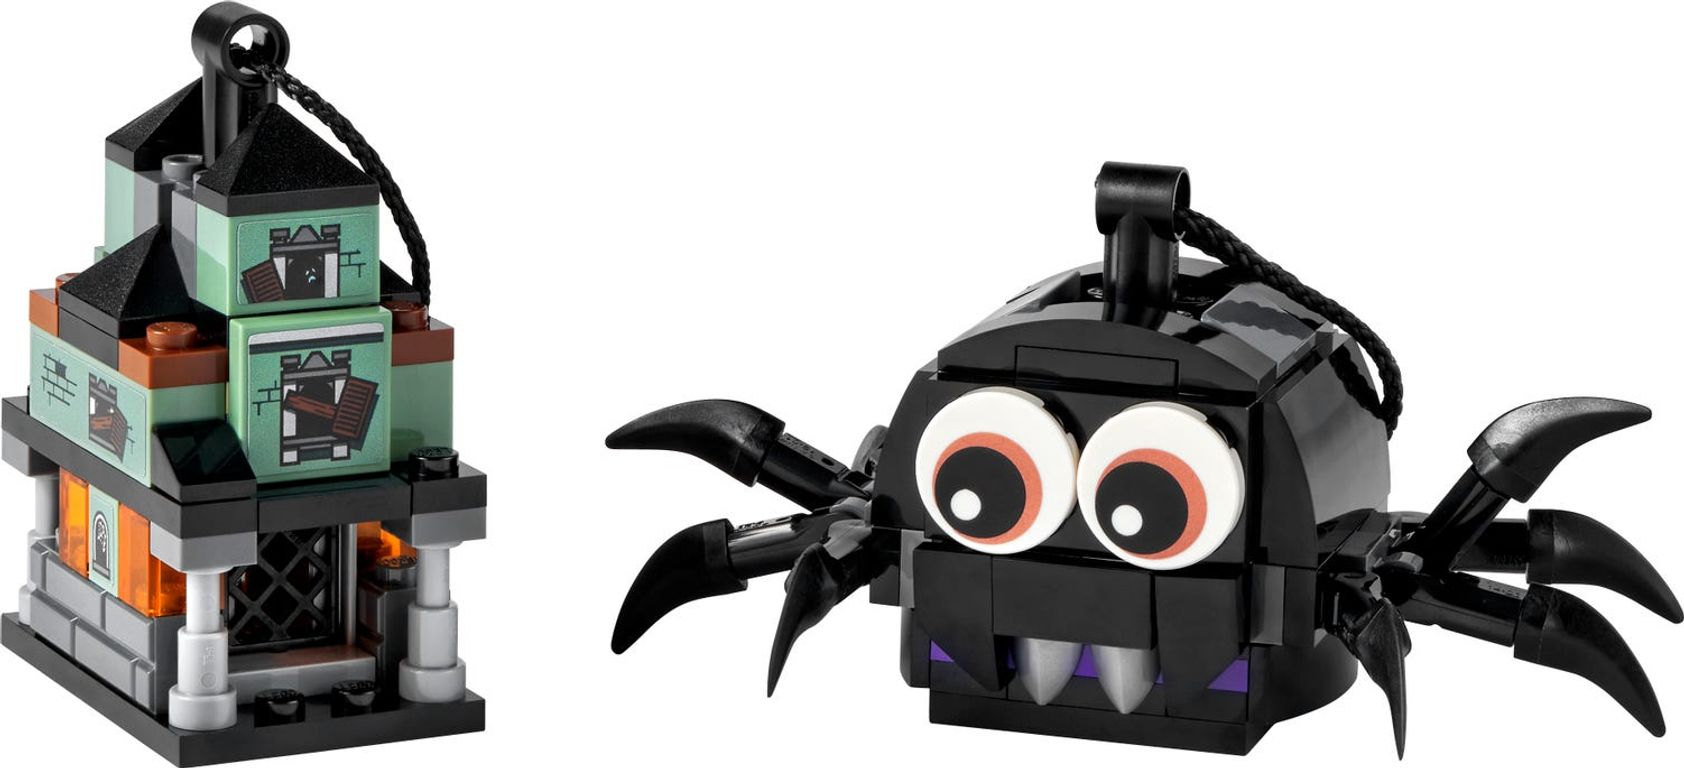 Spider & Haunted House Pack components